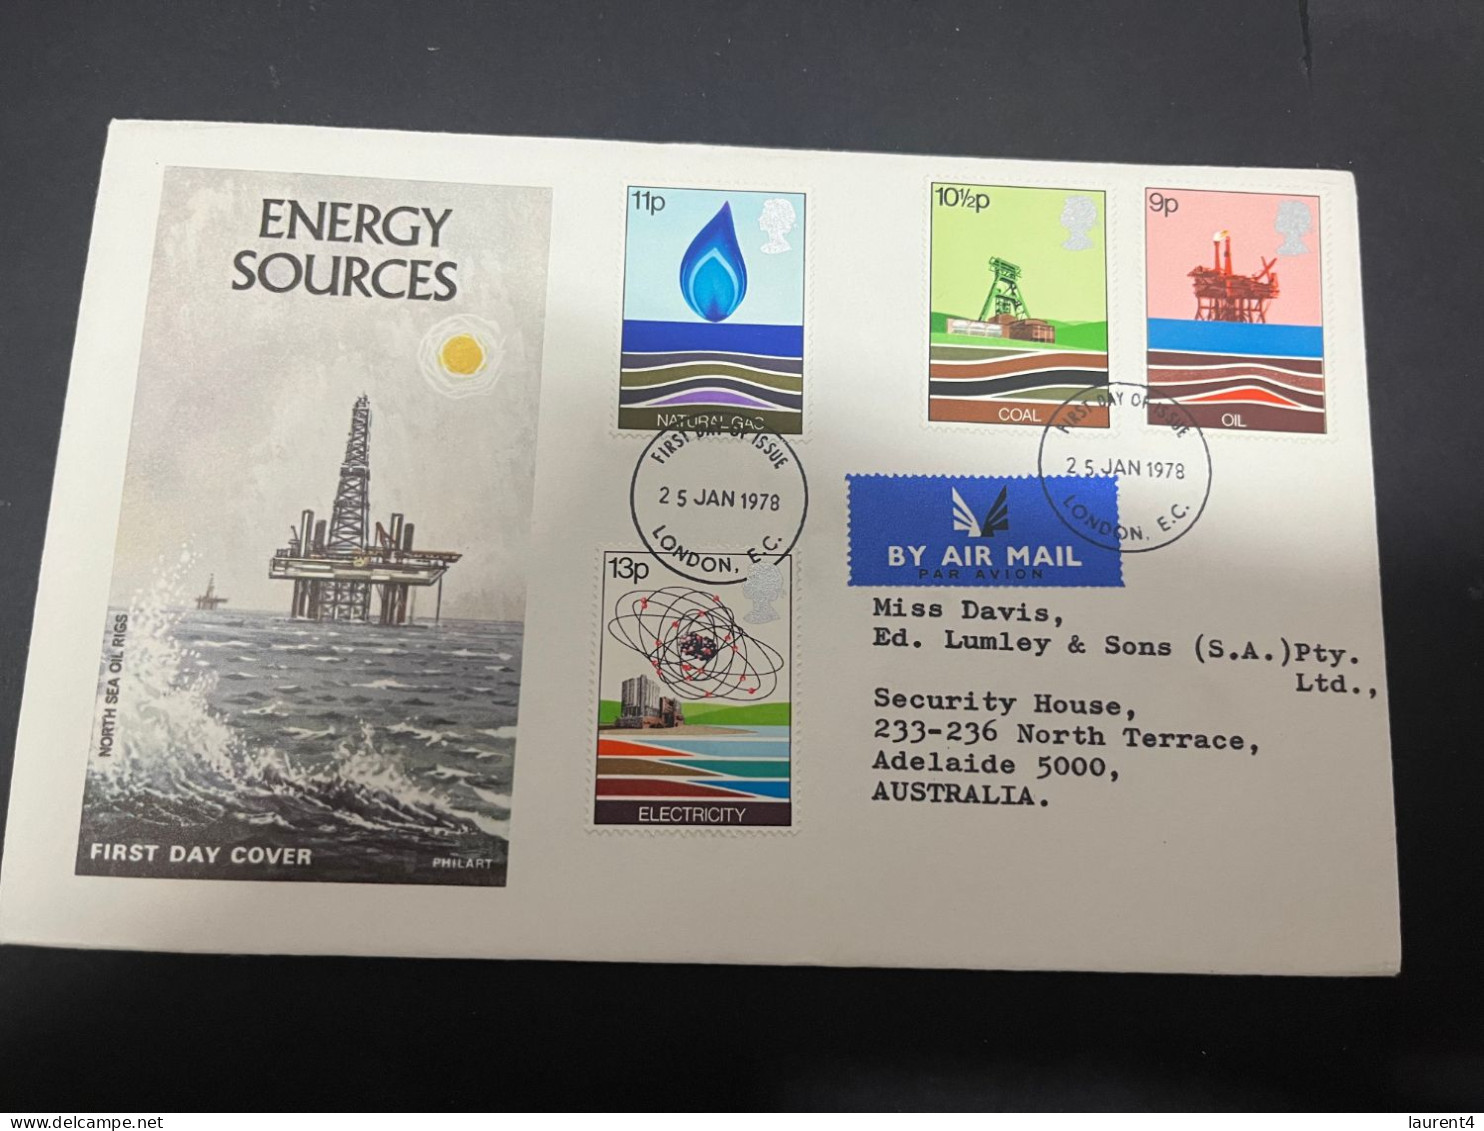 8-2-2024 (3 X 39) UK (Great Britain) FDC - 1978 - Energy Sources - 1971-1980 Decimal Issues